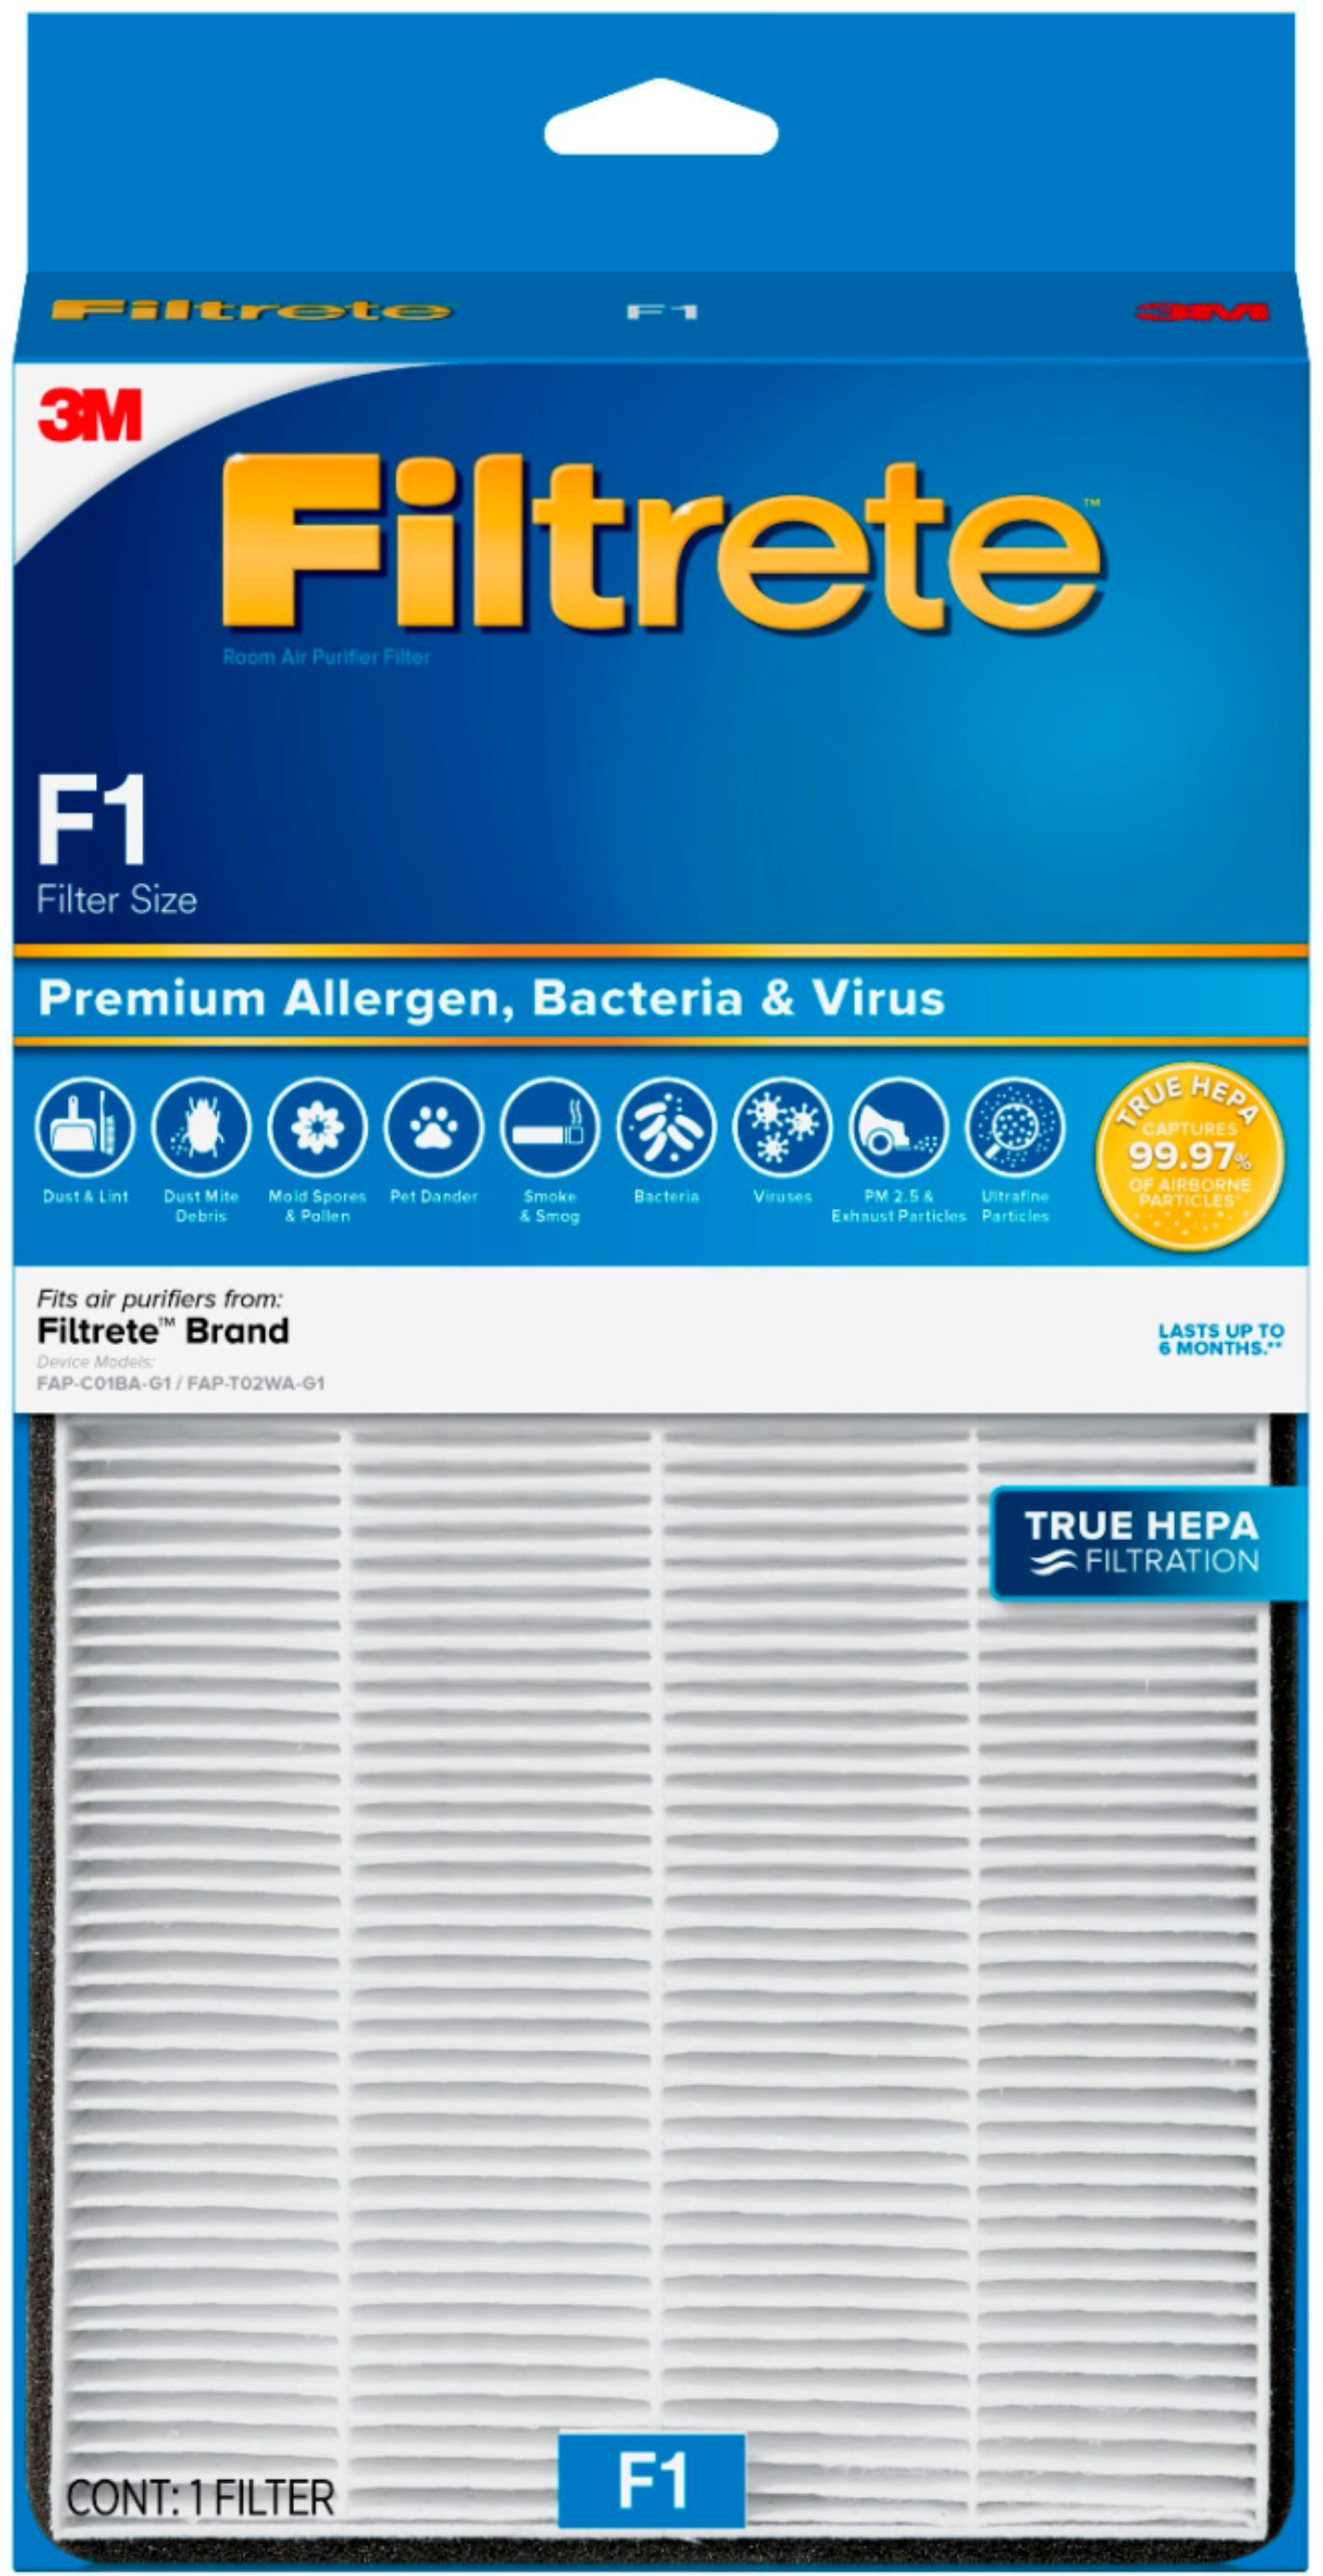 Filtrete F1 Room Air Purifier Filter, True HEPA Premium Allergen, Bacteria,  & Virus, 12 in. x 6.75 in., 2-Pack, Works with Devices: FAP-C01BA-G1